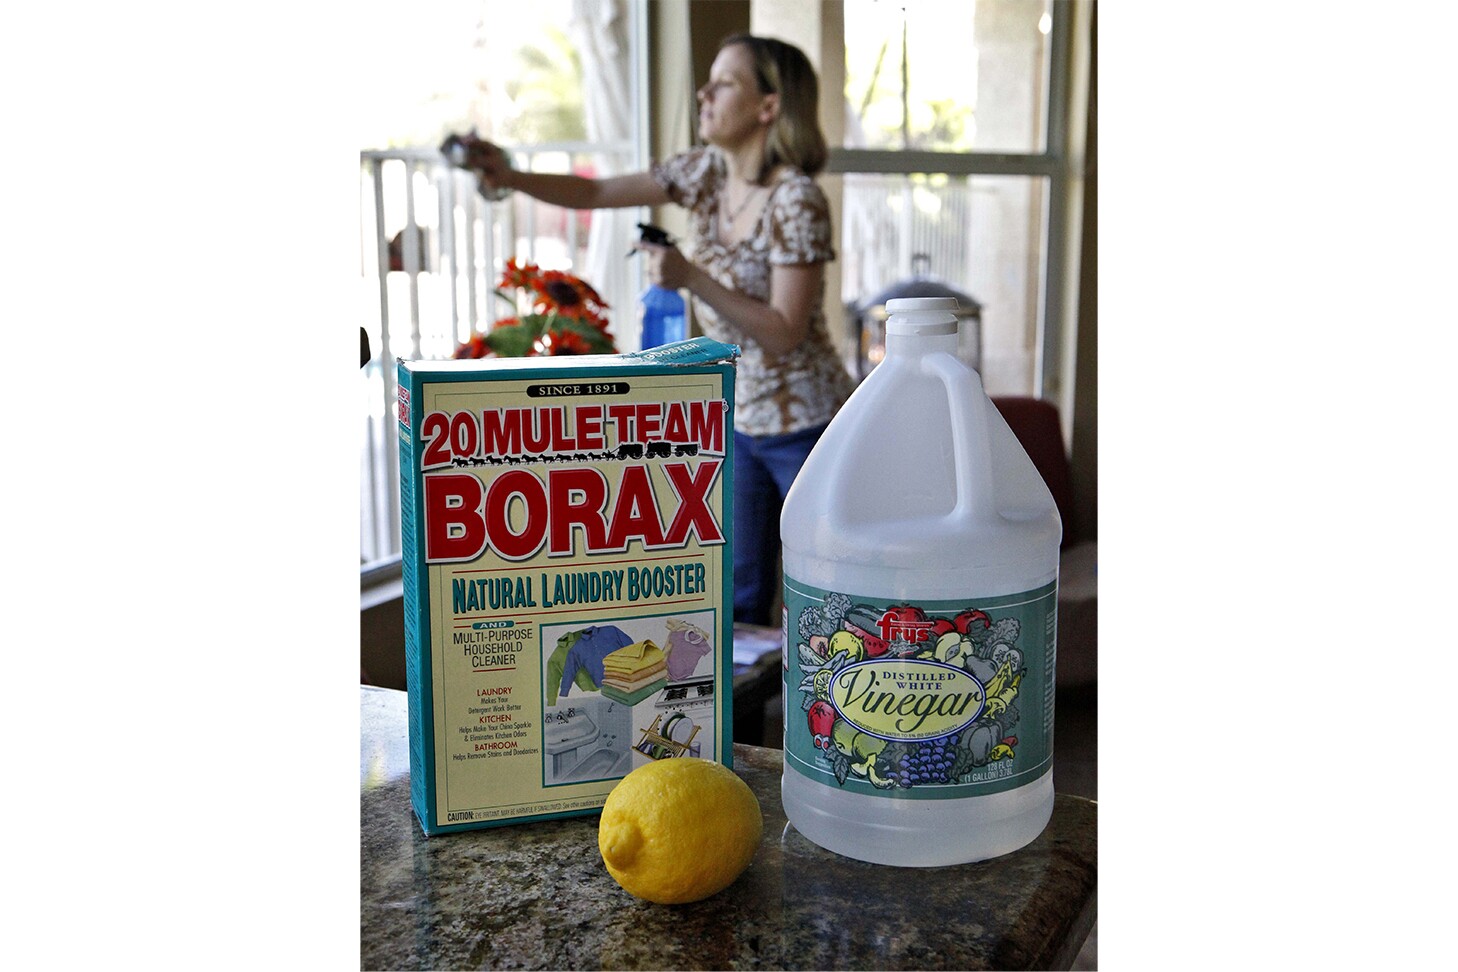 Experts Warn That Borax Cleaning Powder